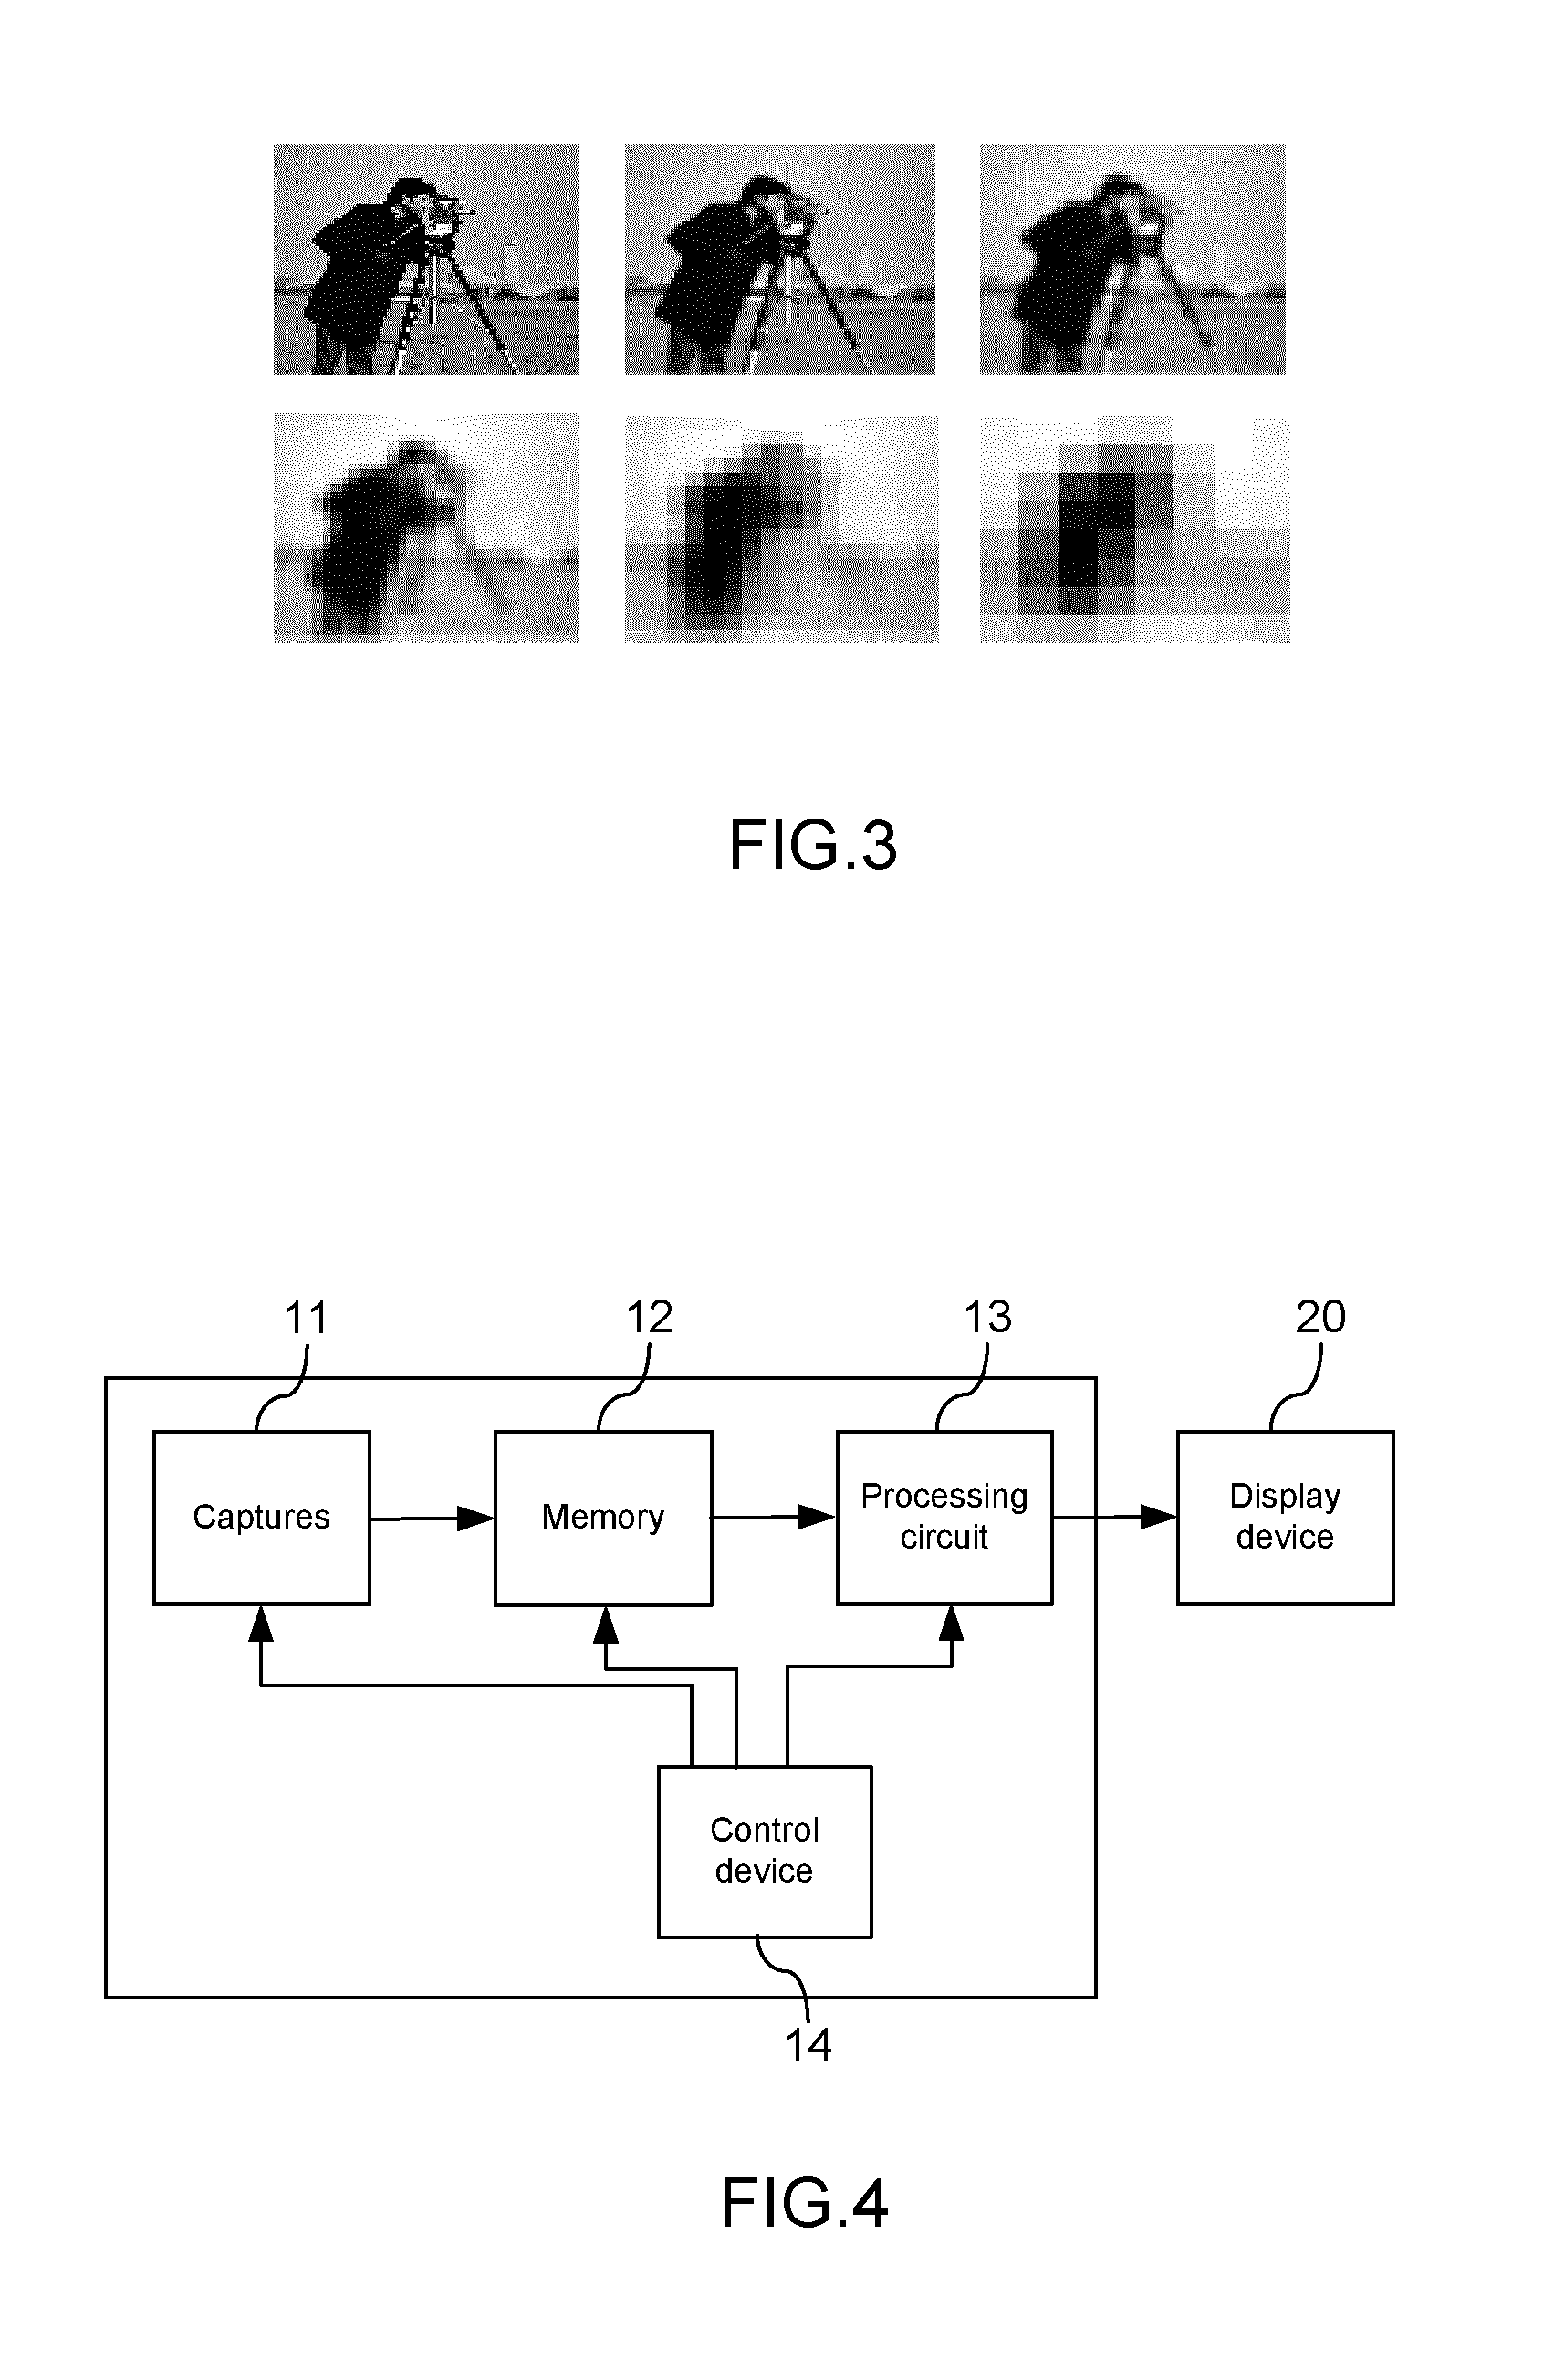 Method and device for generating images comprising motion blur